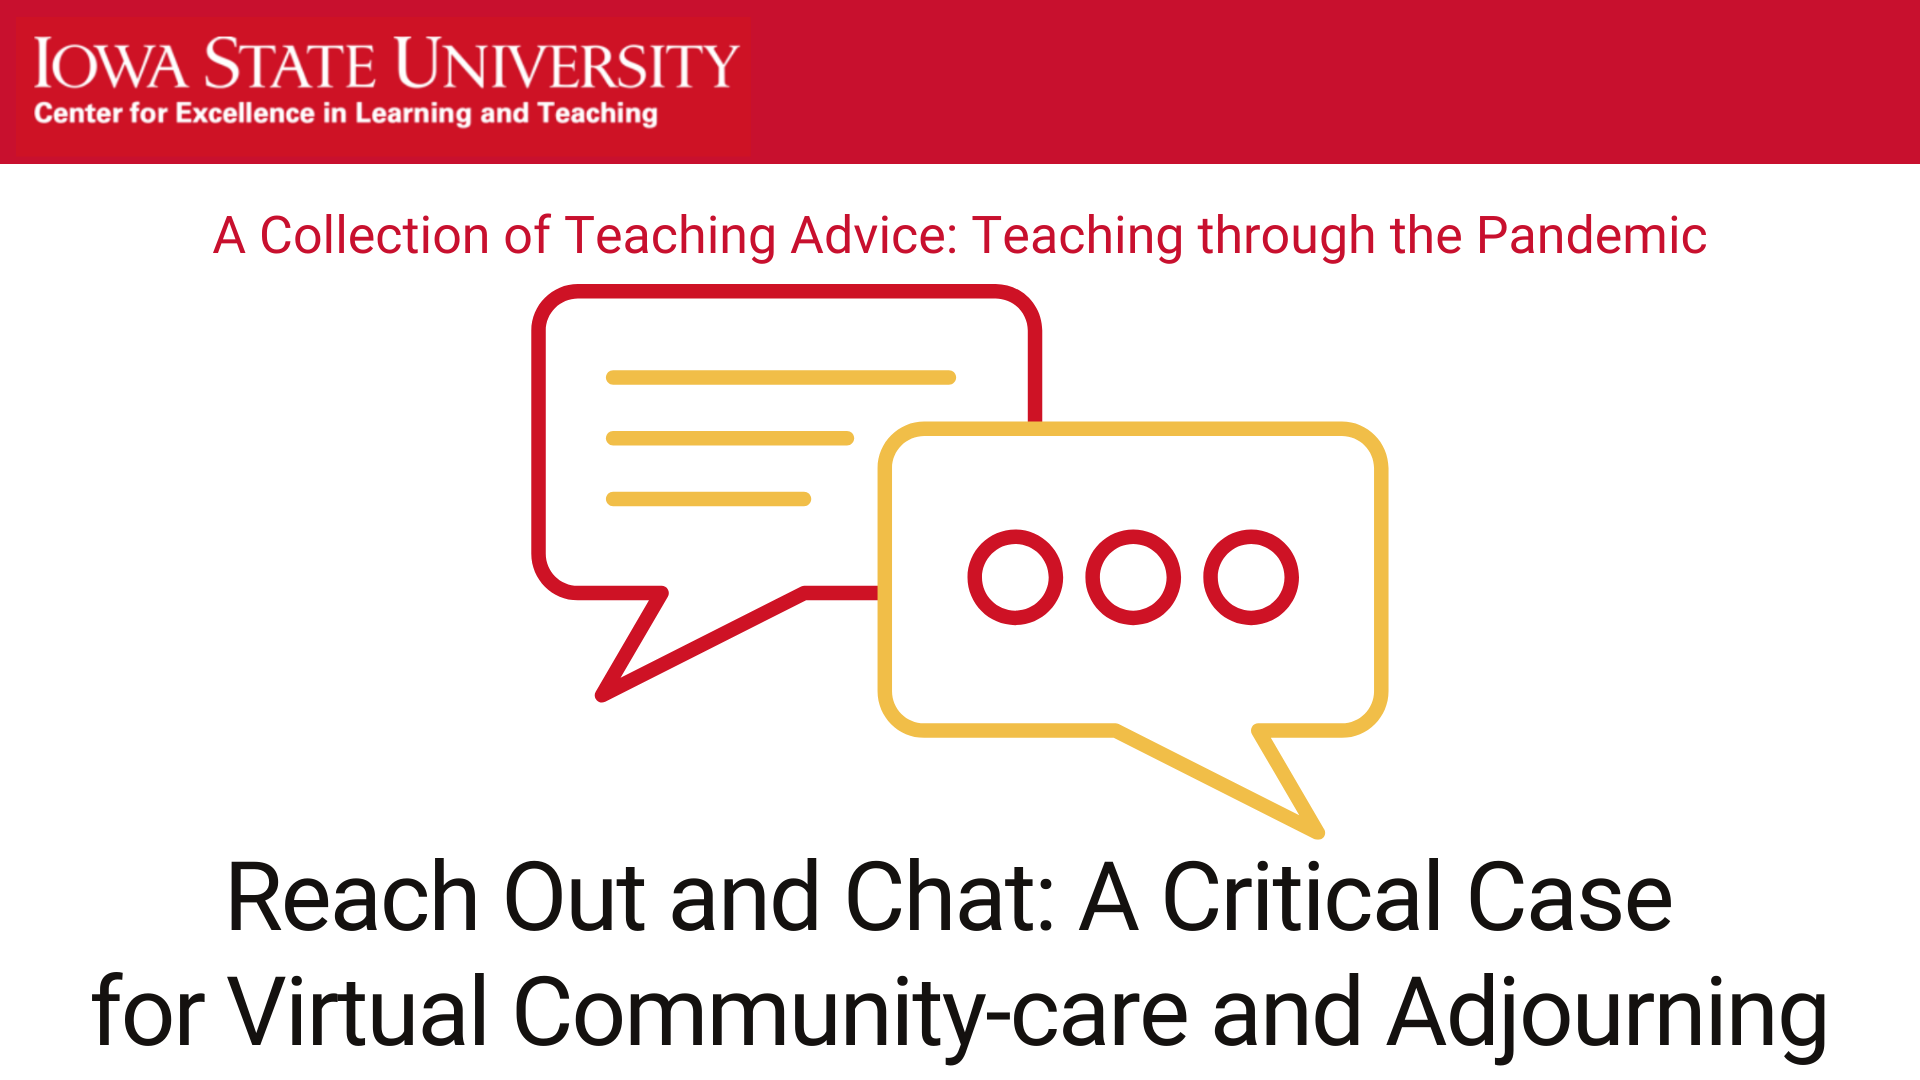 Reach out and chat: A critical case for virtual community-care and adjourning, Dr. Terah J. Stewart